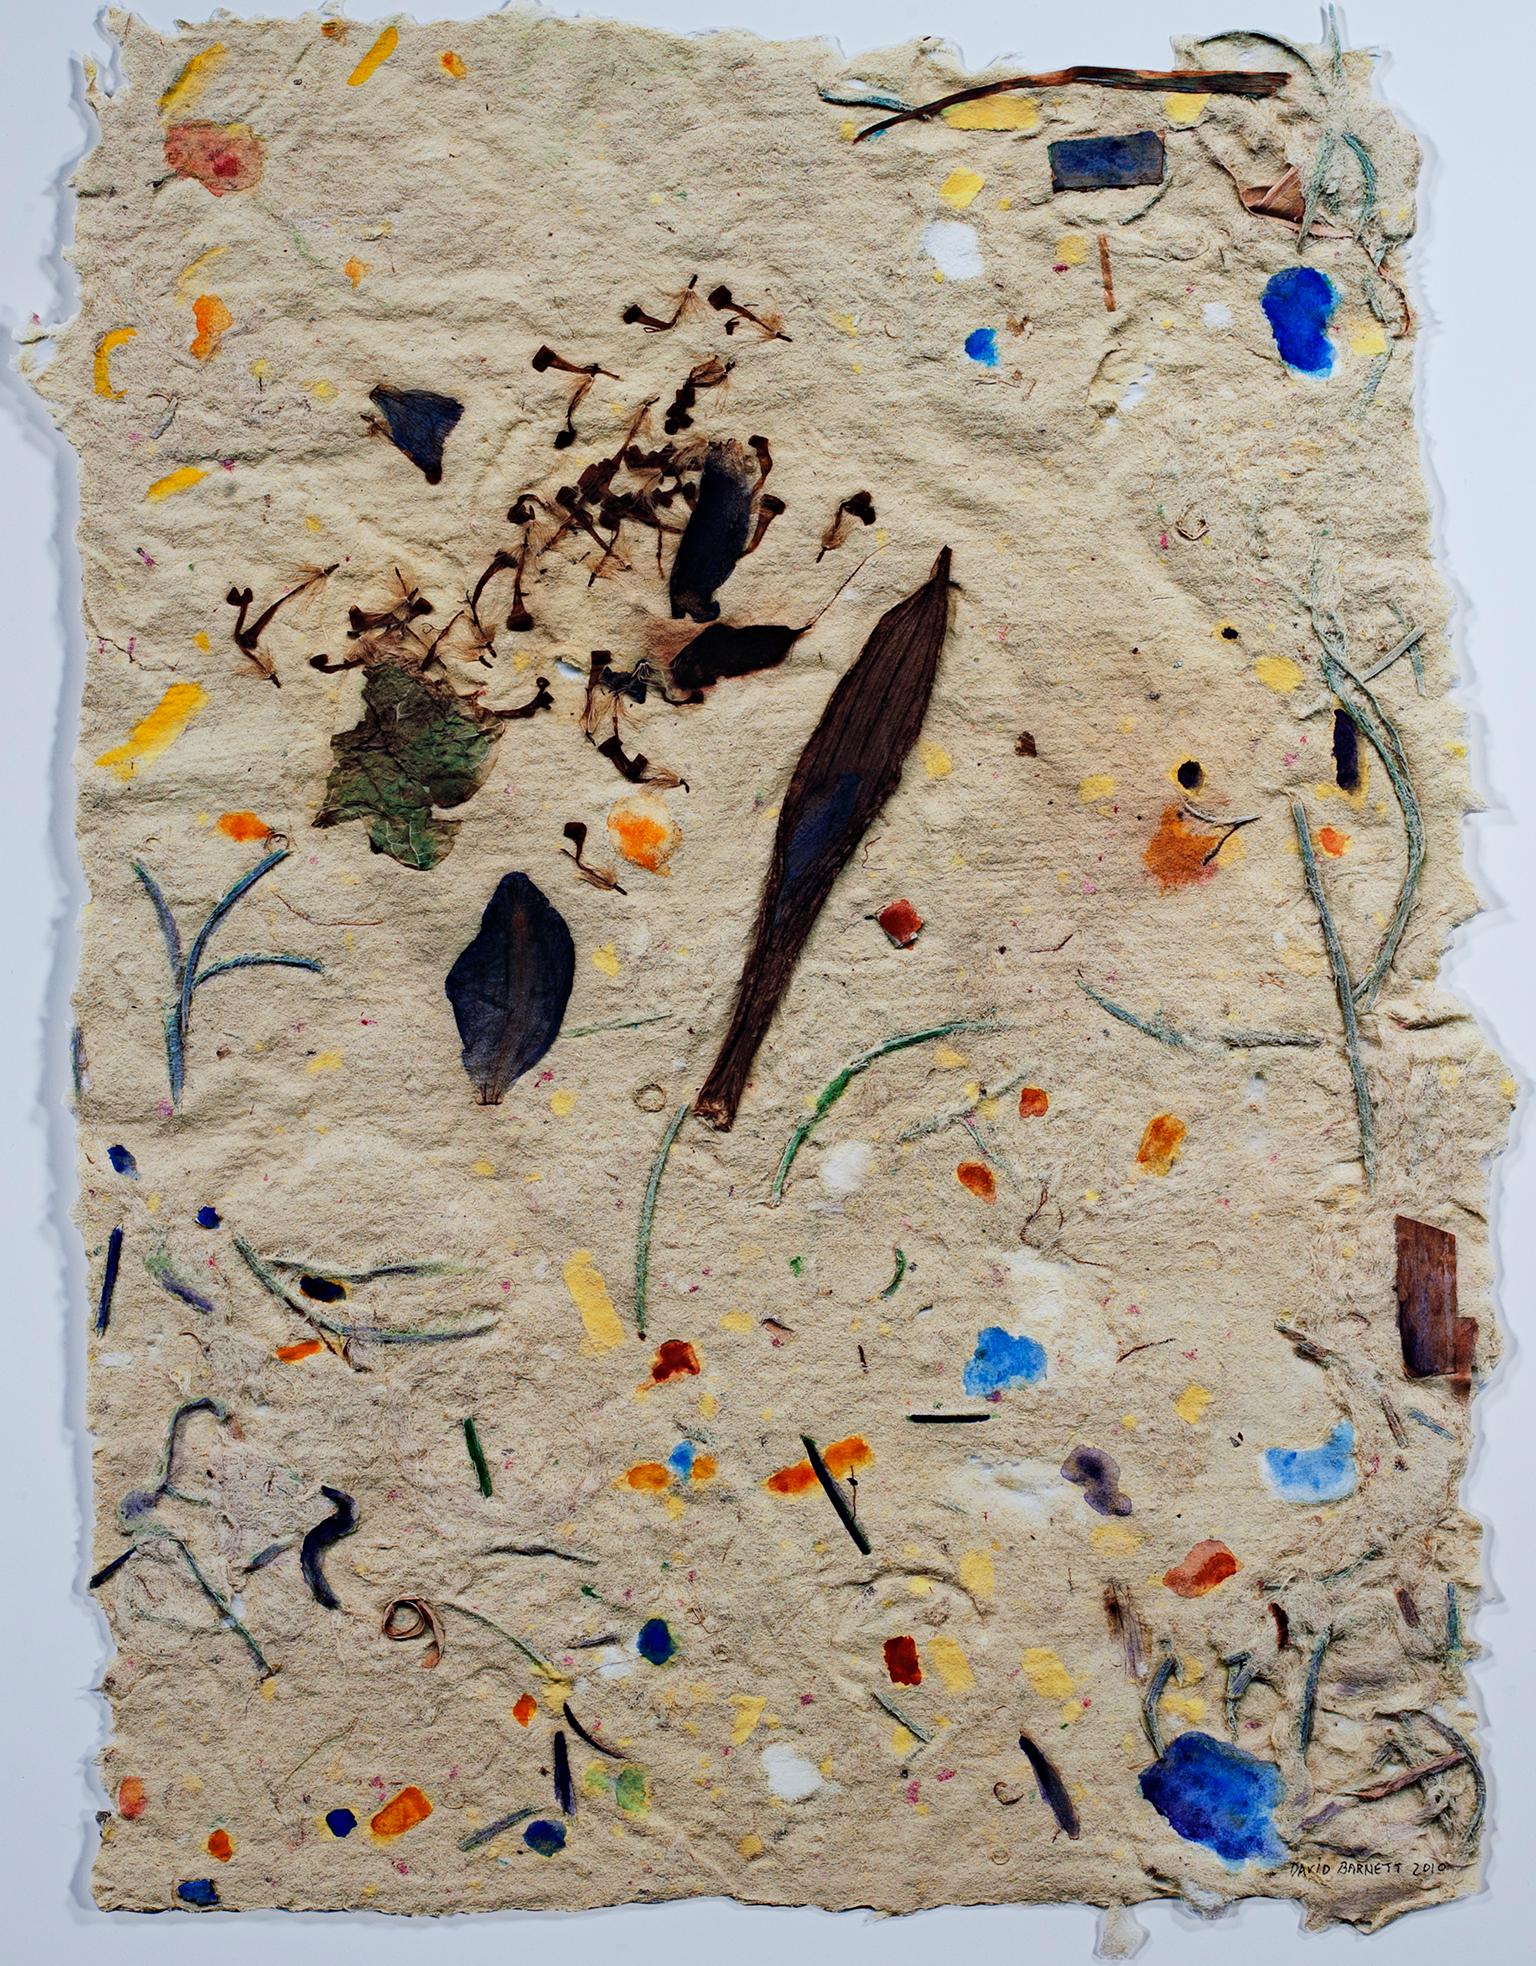 "Garden Celebration II" is an original mixed media piece by David Barnett, including watercolor on paper that was hand-made by the artist. The artist has embedded various objects into the paper, including leaves and flower petals and colored strips